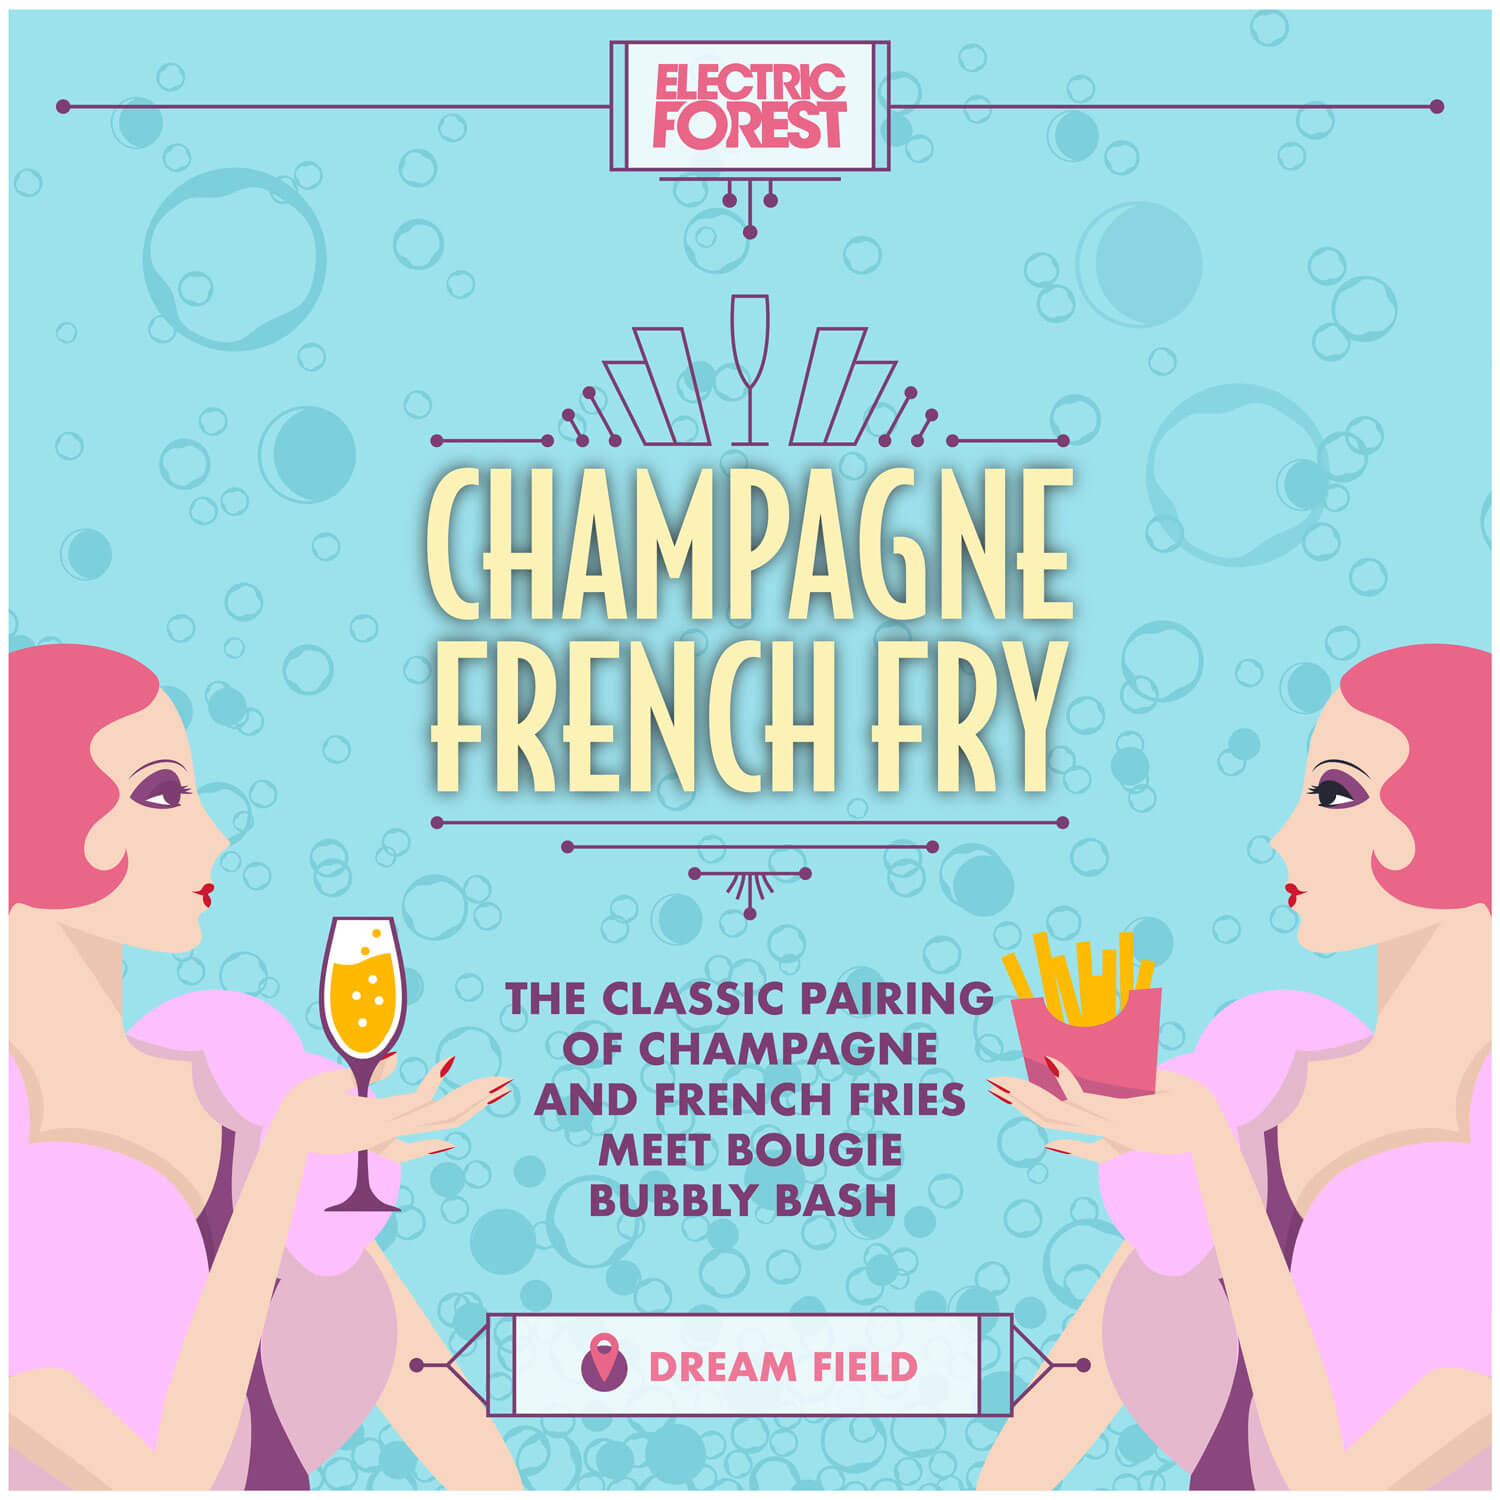 Champagne French Fry